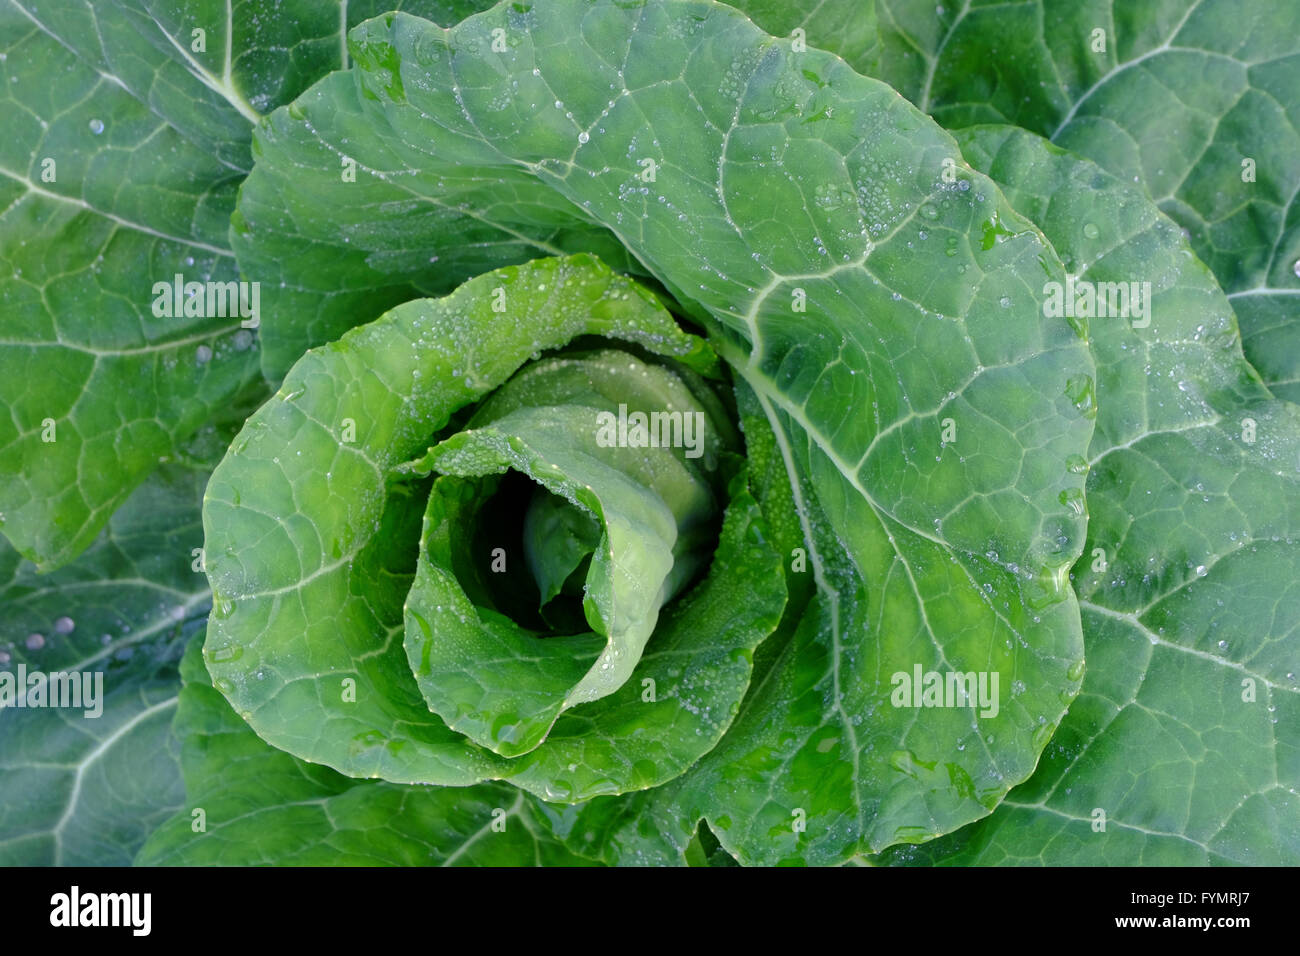 a tight crop of growing green cabbage taken from above Stock Photo